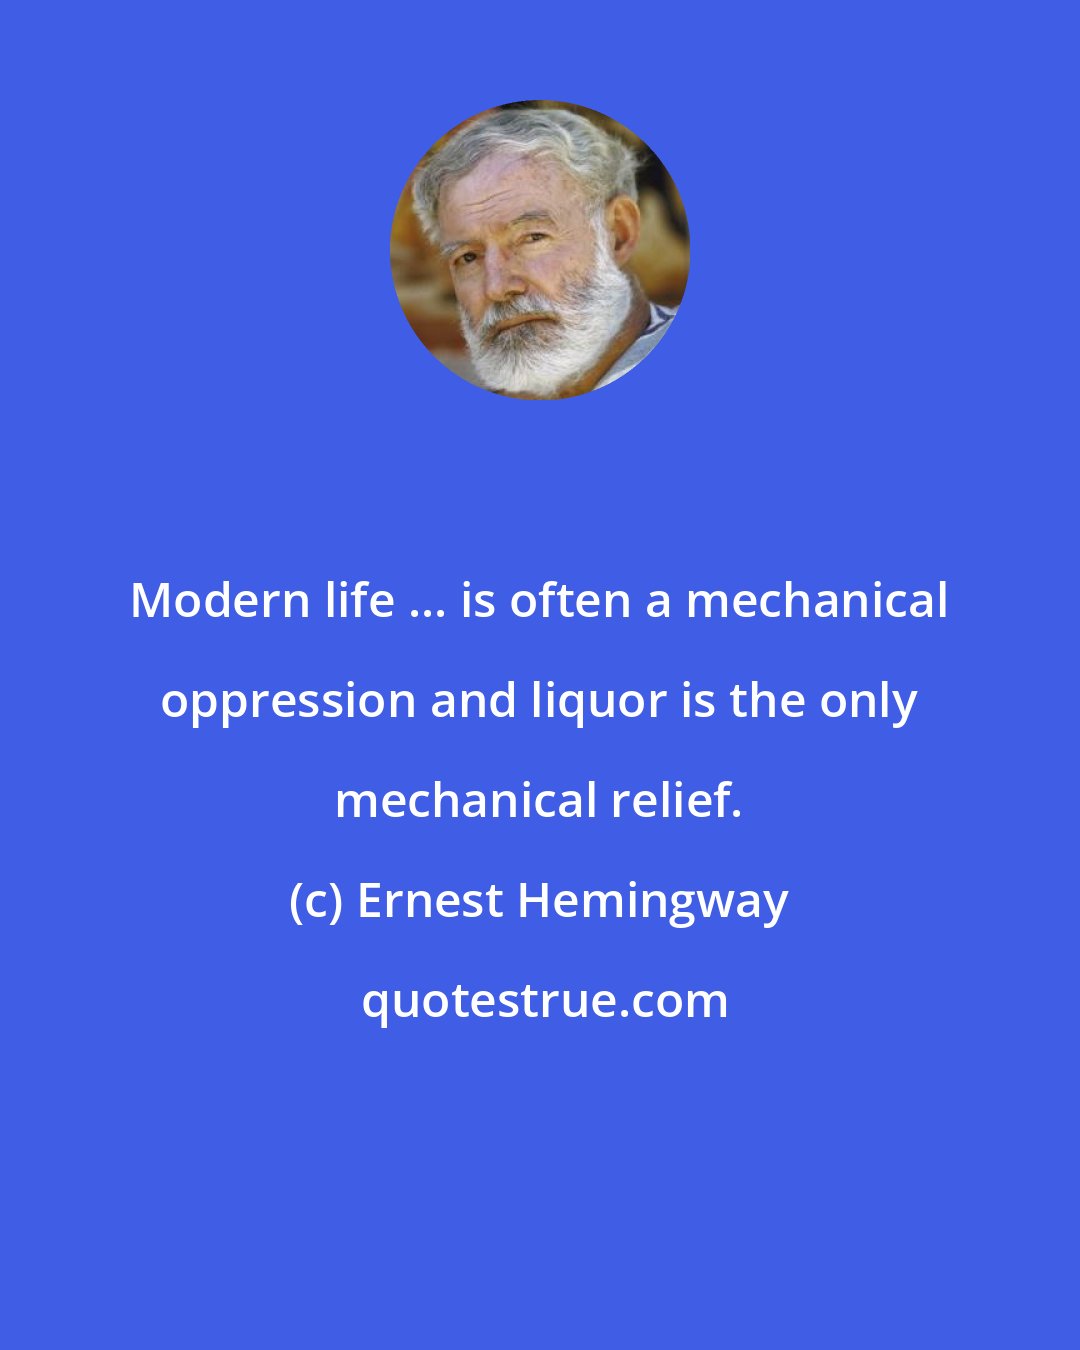 Ernest Hemingway: Modern life ... is often a mechanical oppression and liquor is the only mechanical relief.